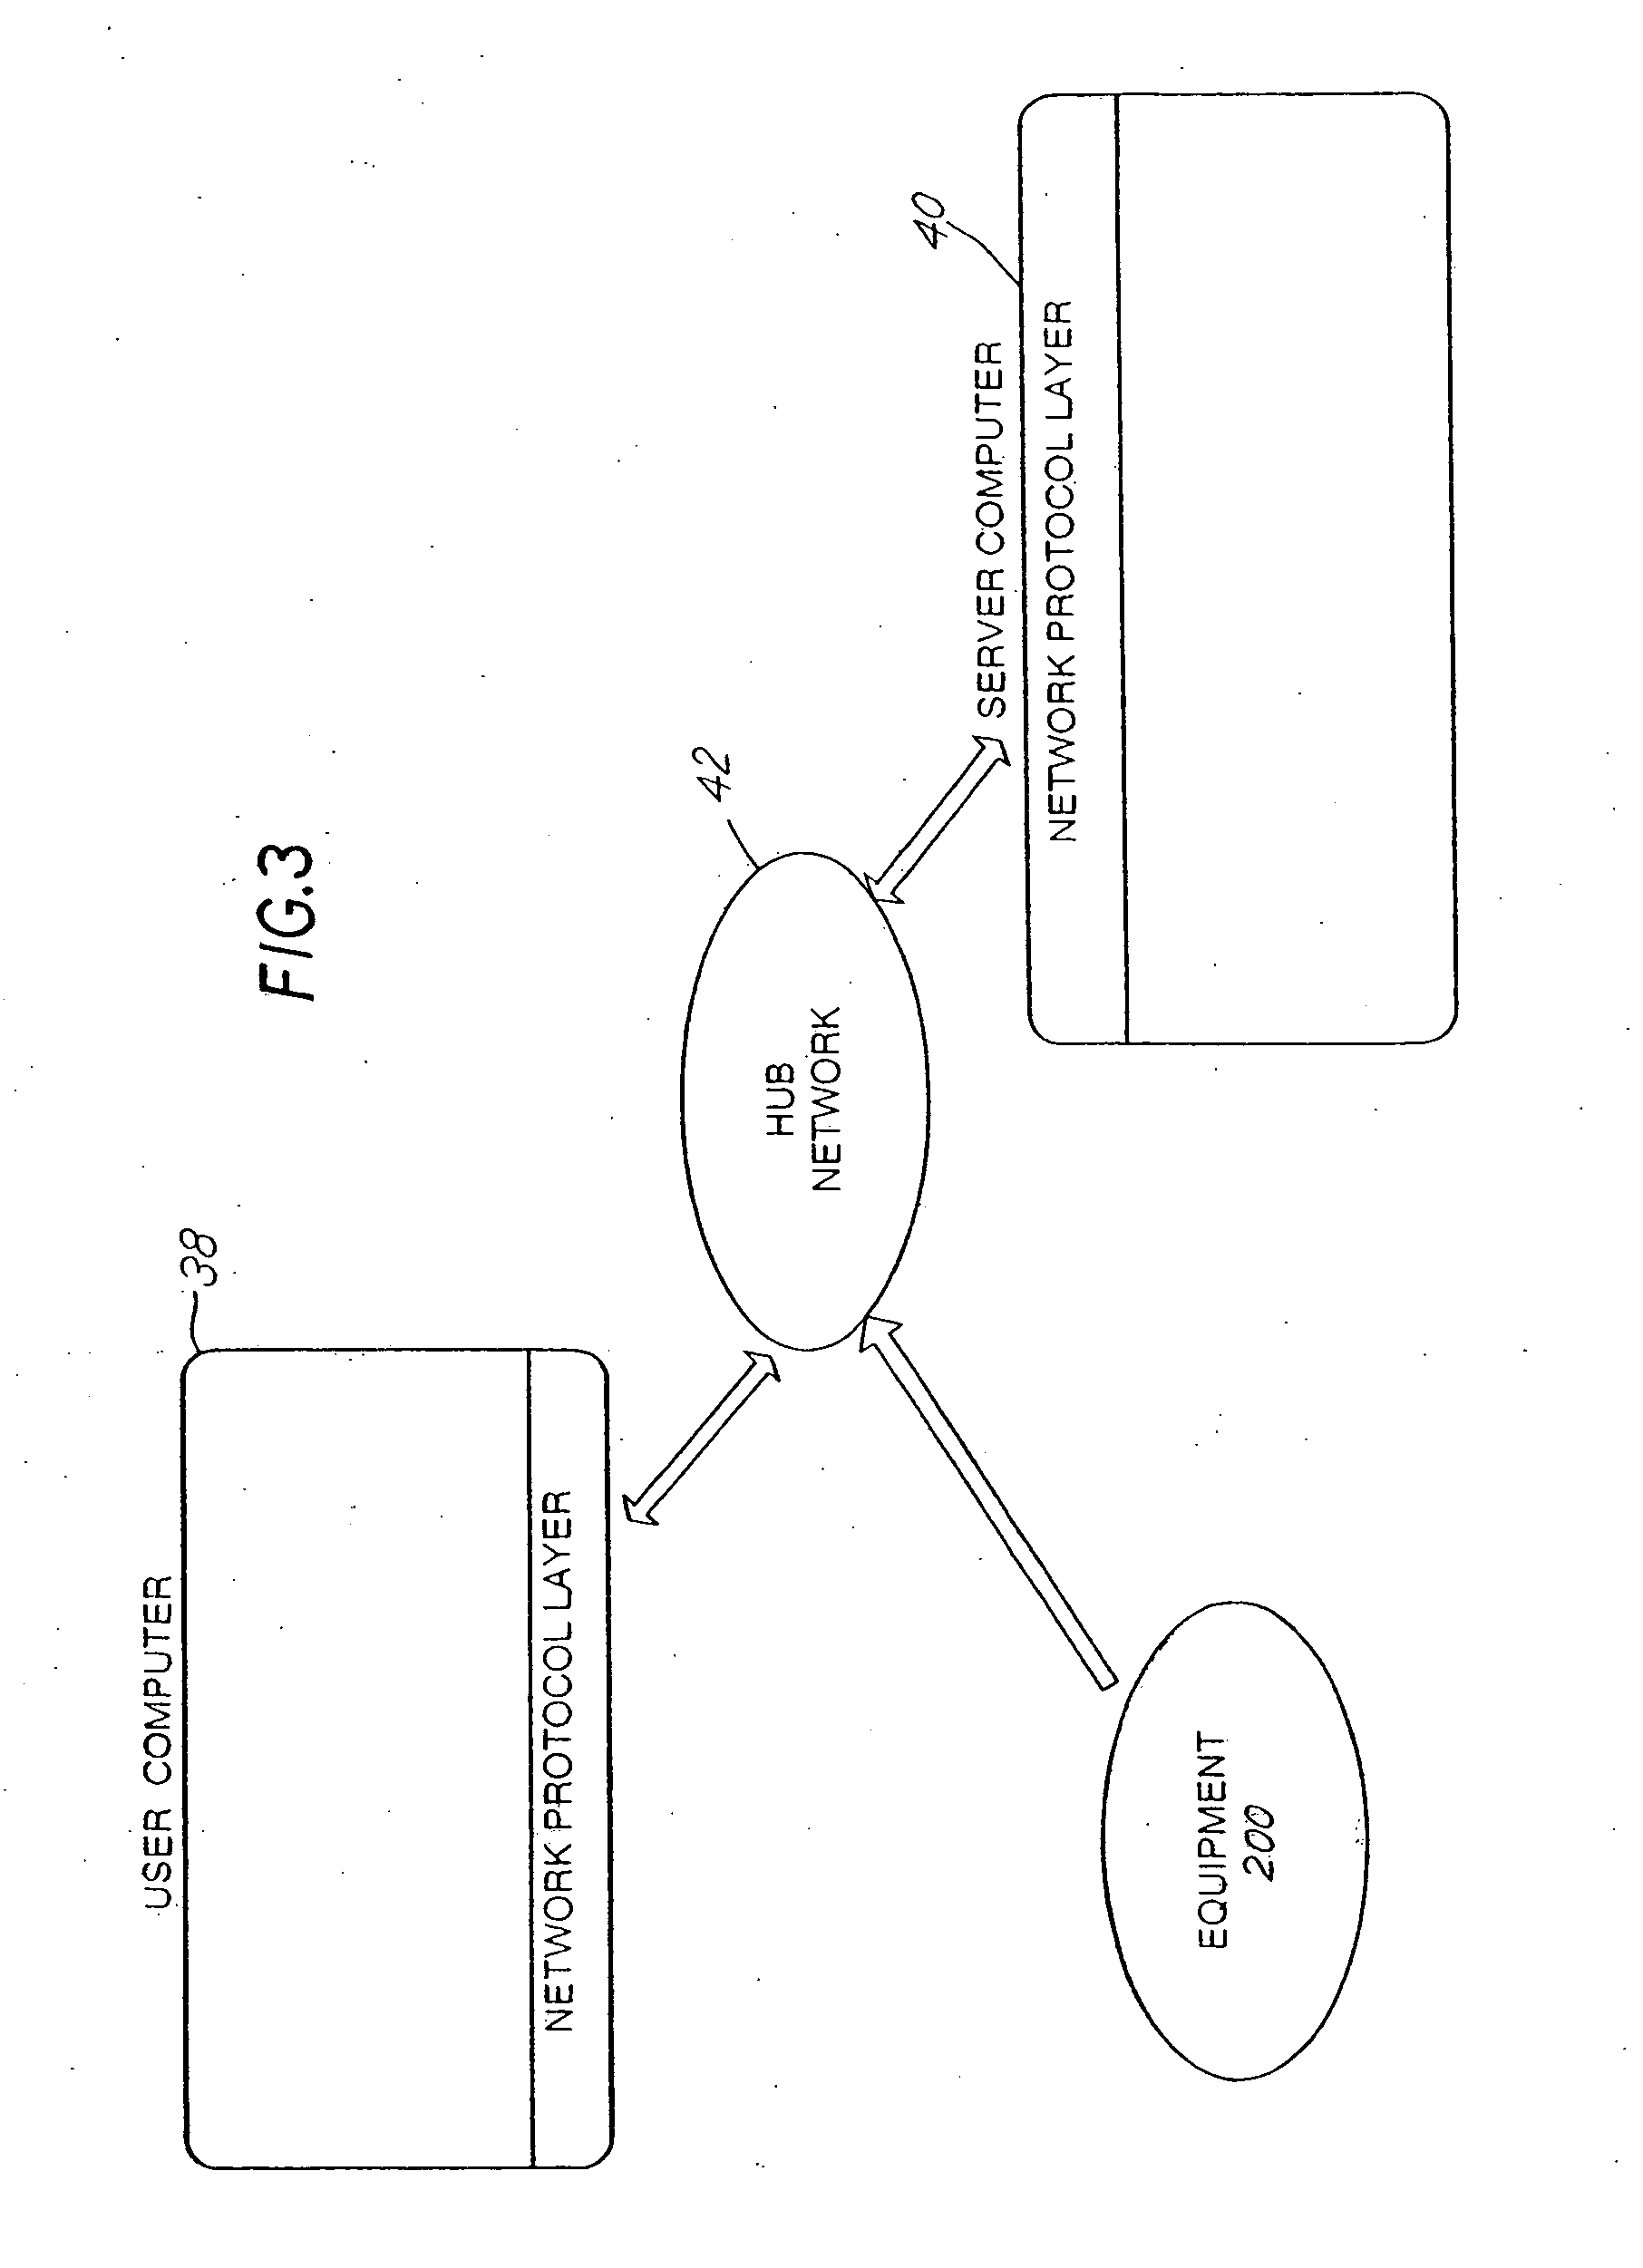 System, method, and computer-readable medium for collection of environmental data and generation of user report for compliance with FDA requirements